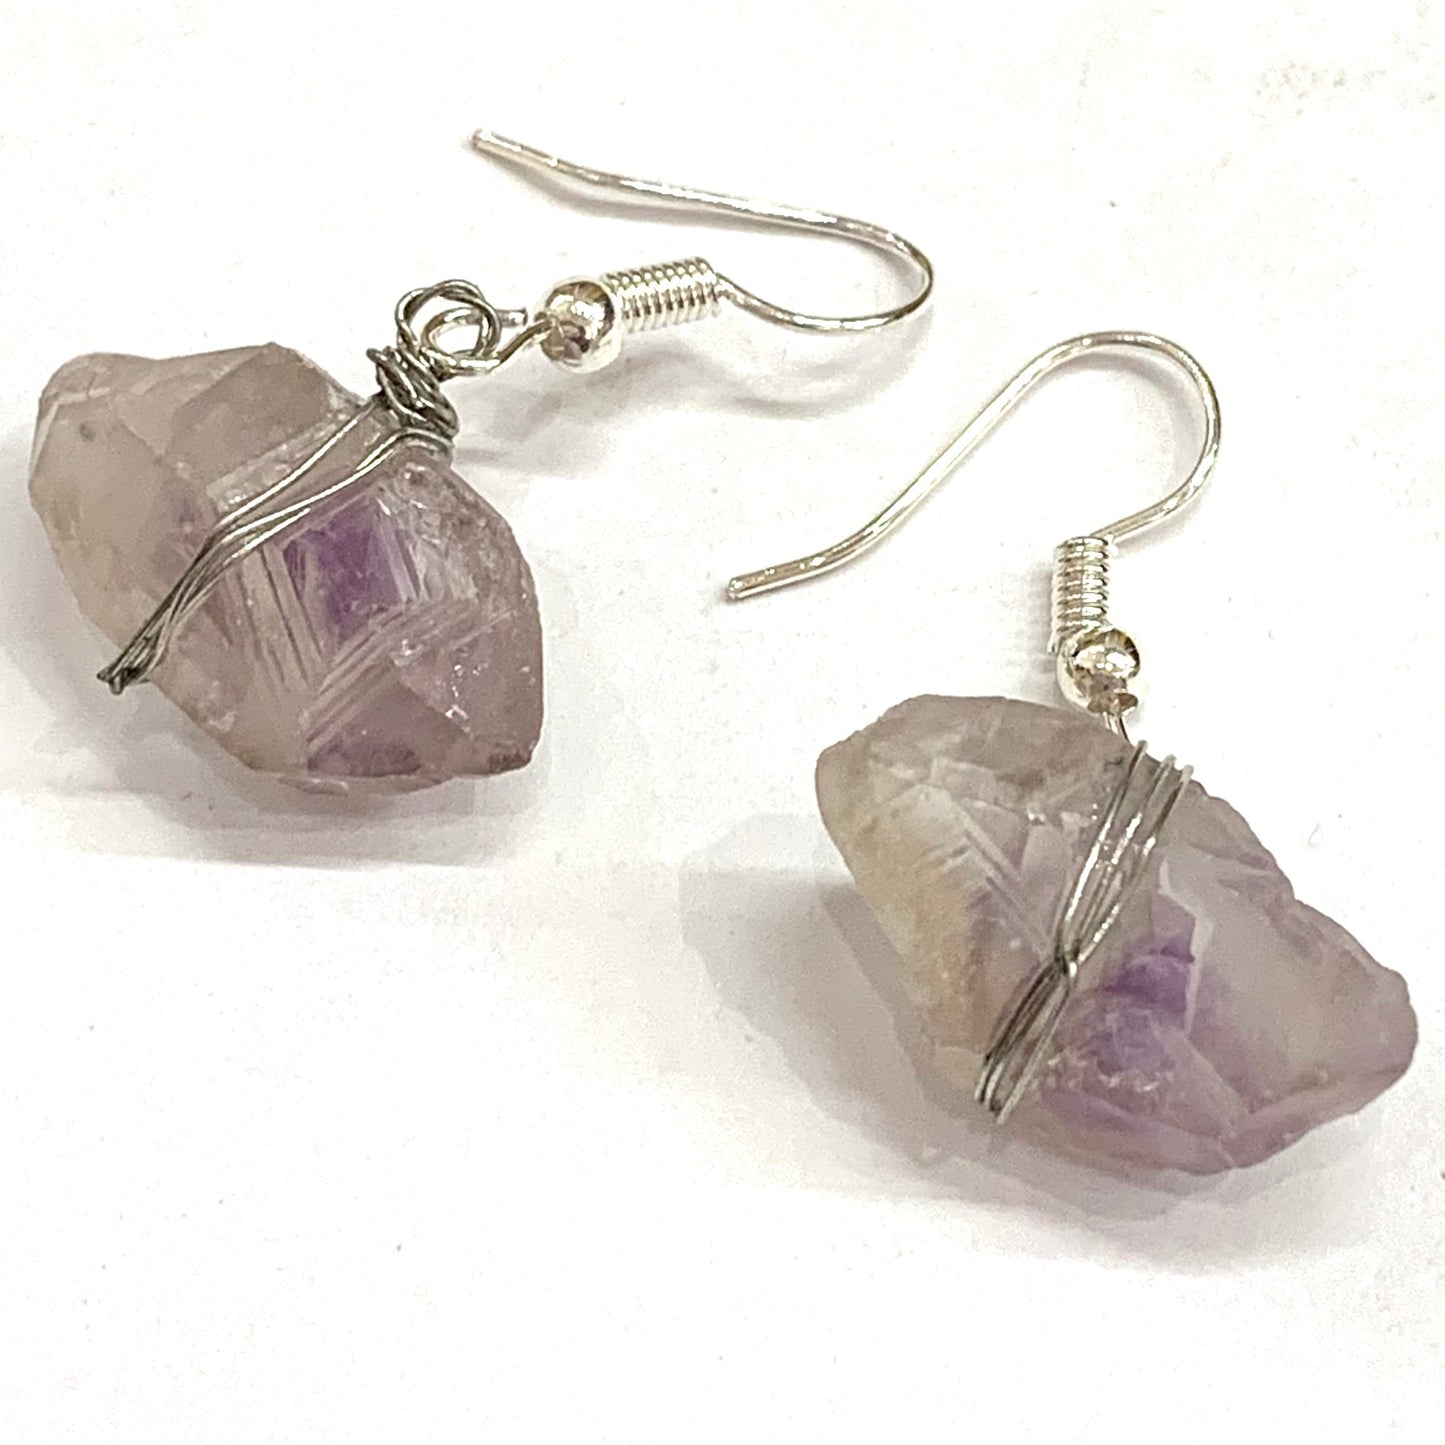 Cosmic Creations - Wrapped Crystal Dangle Earrings- Amethyst with Silver